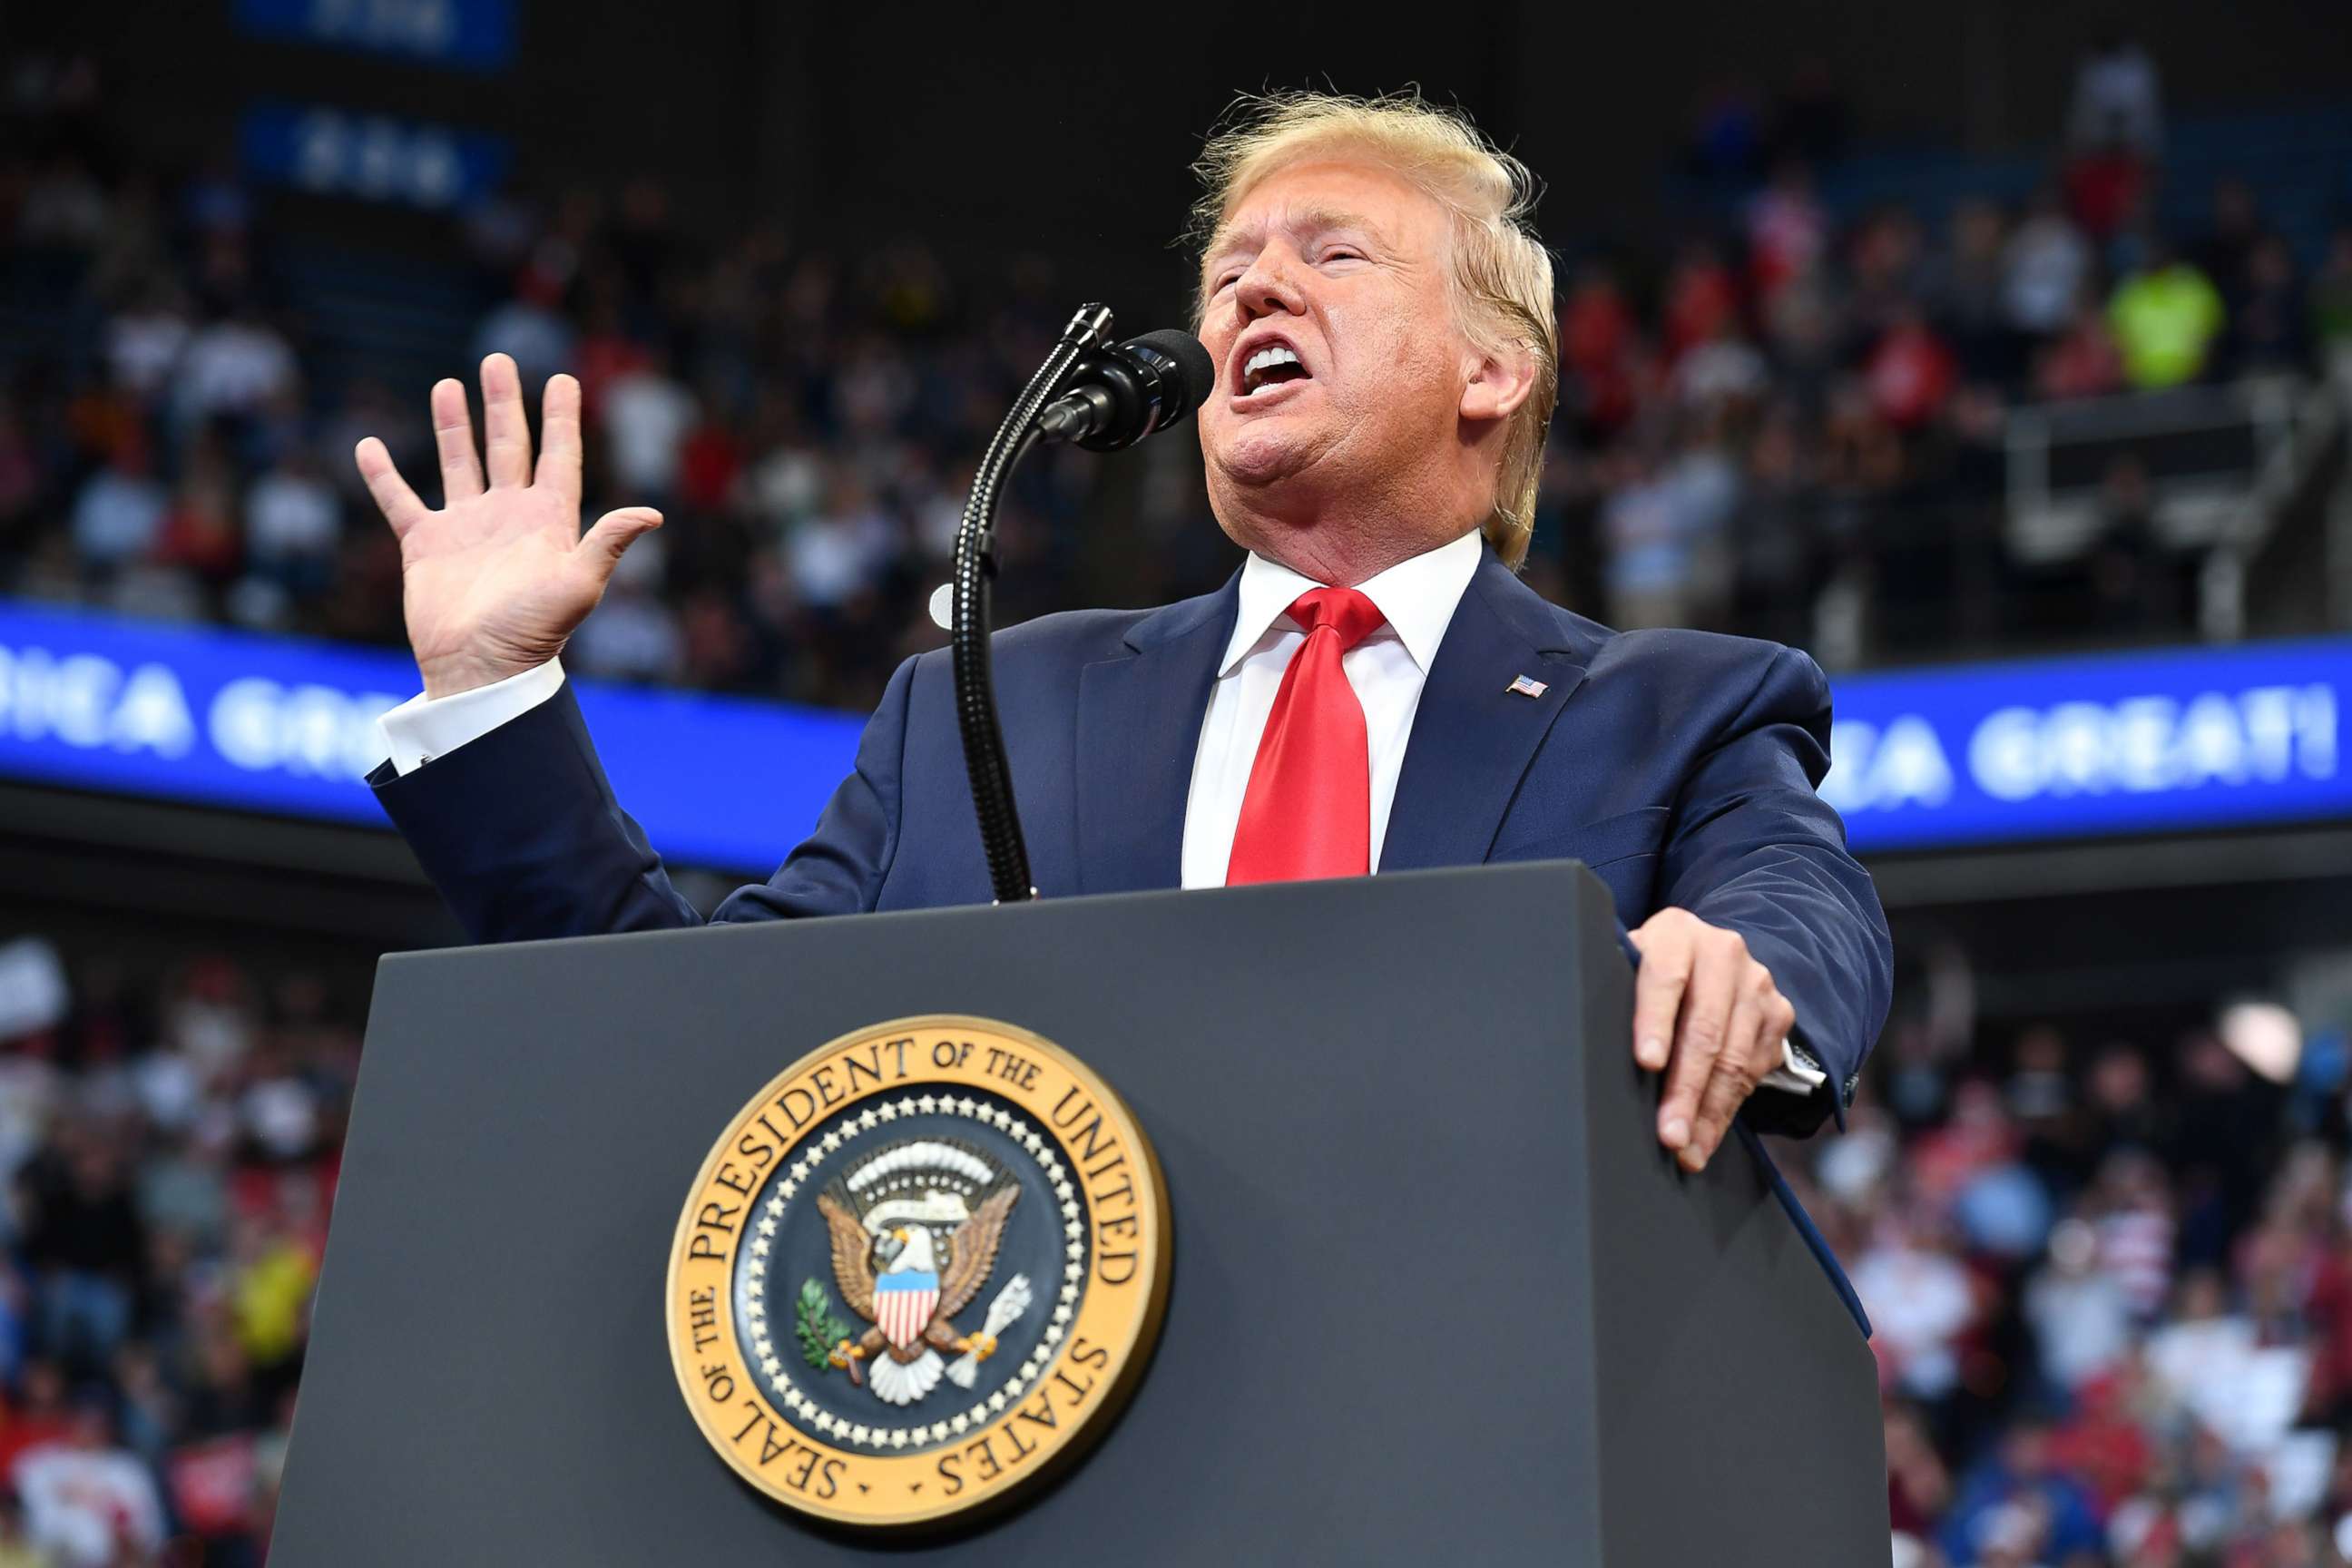 PHOTO: In this file photo taken on November 4, 2019, President Donald Trump gestures as he speaks during a rally at Rupp Arena in Lexington, Kentucky.